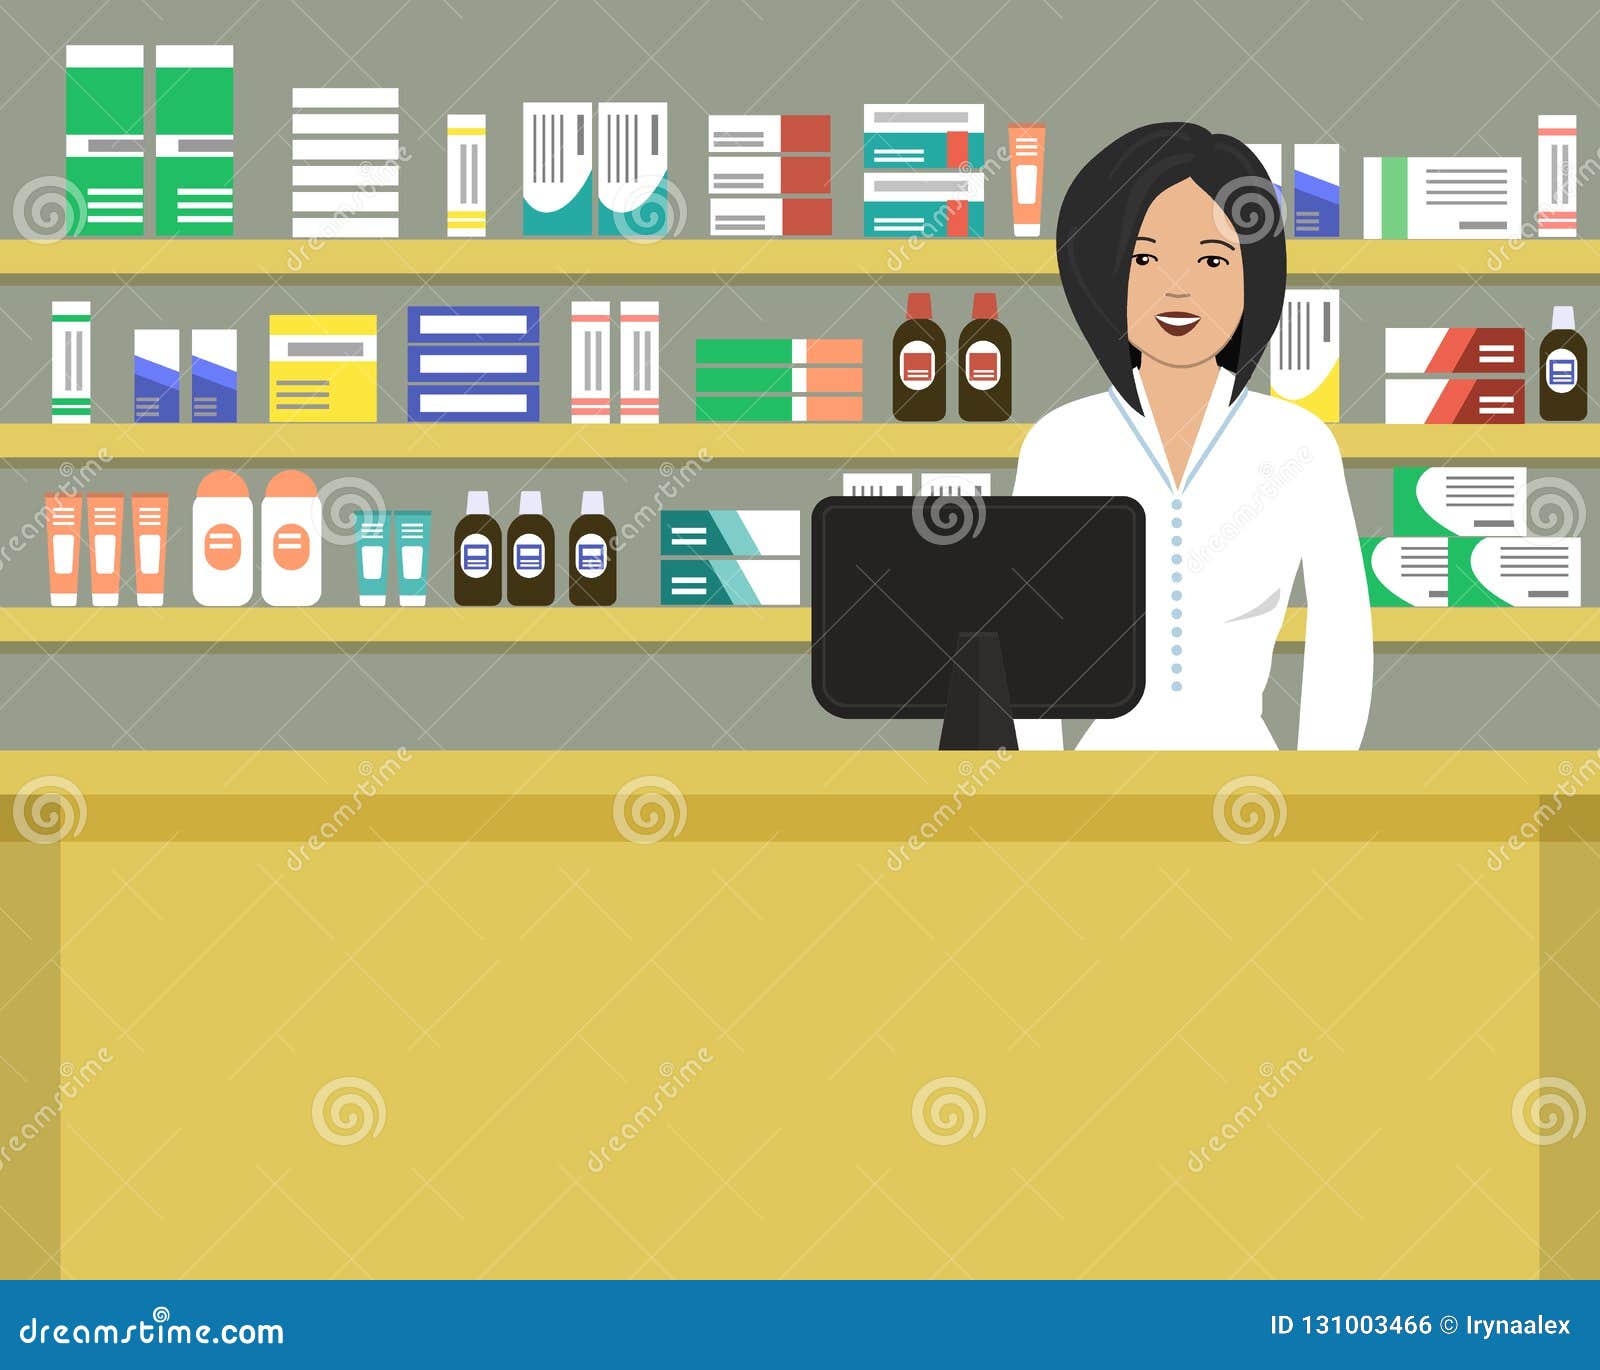 Web Banner of a Pharmacist. Pharmacy in a Yellow Color Stock Vector ...